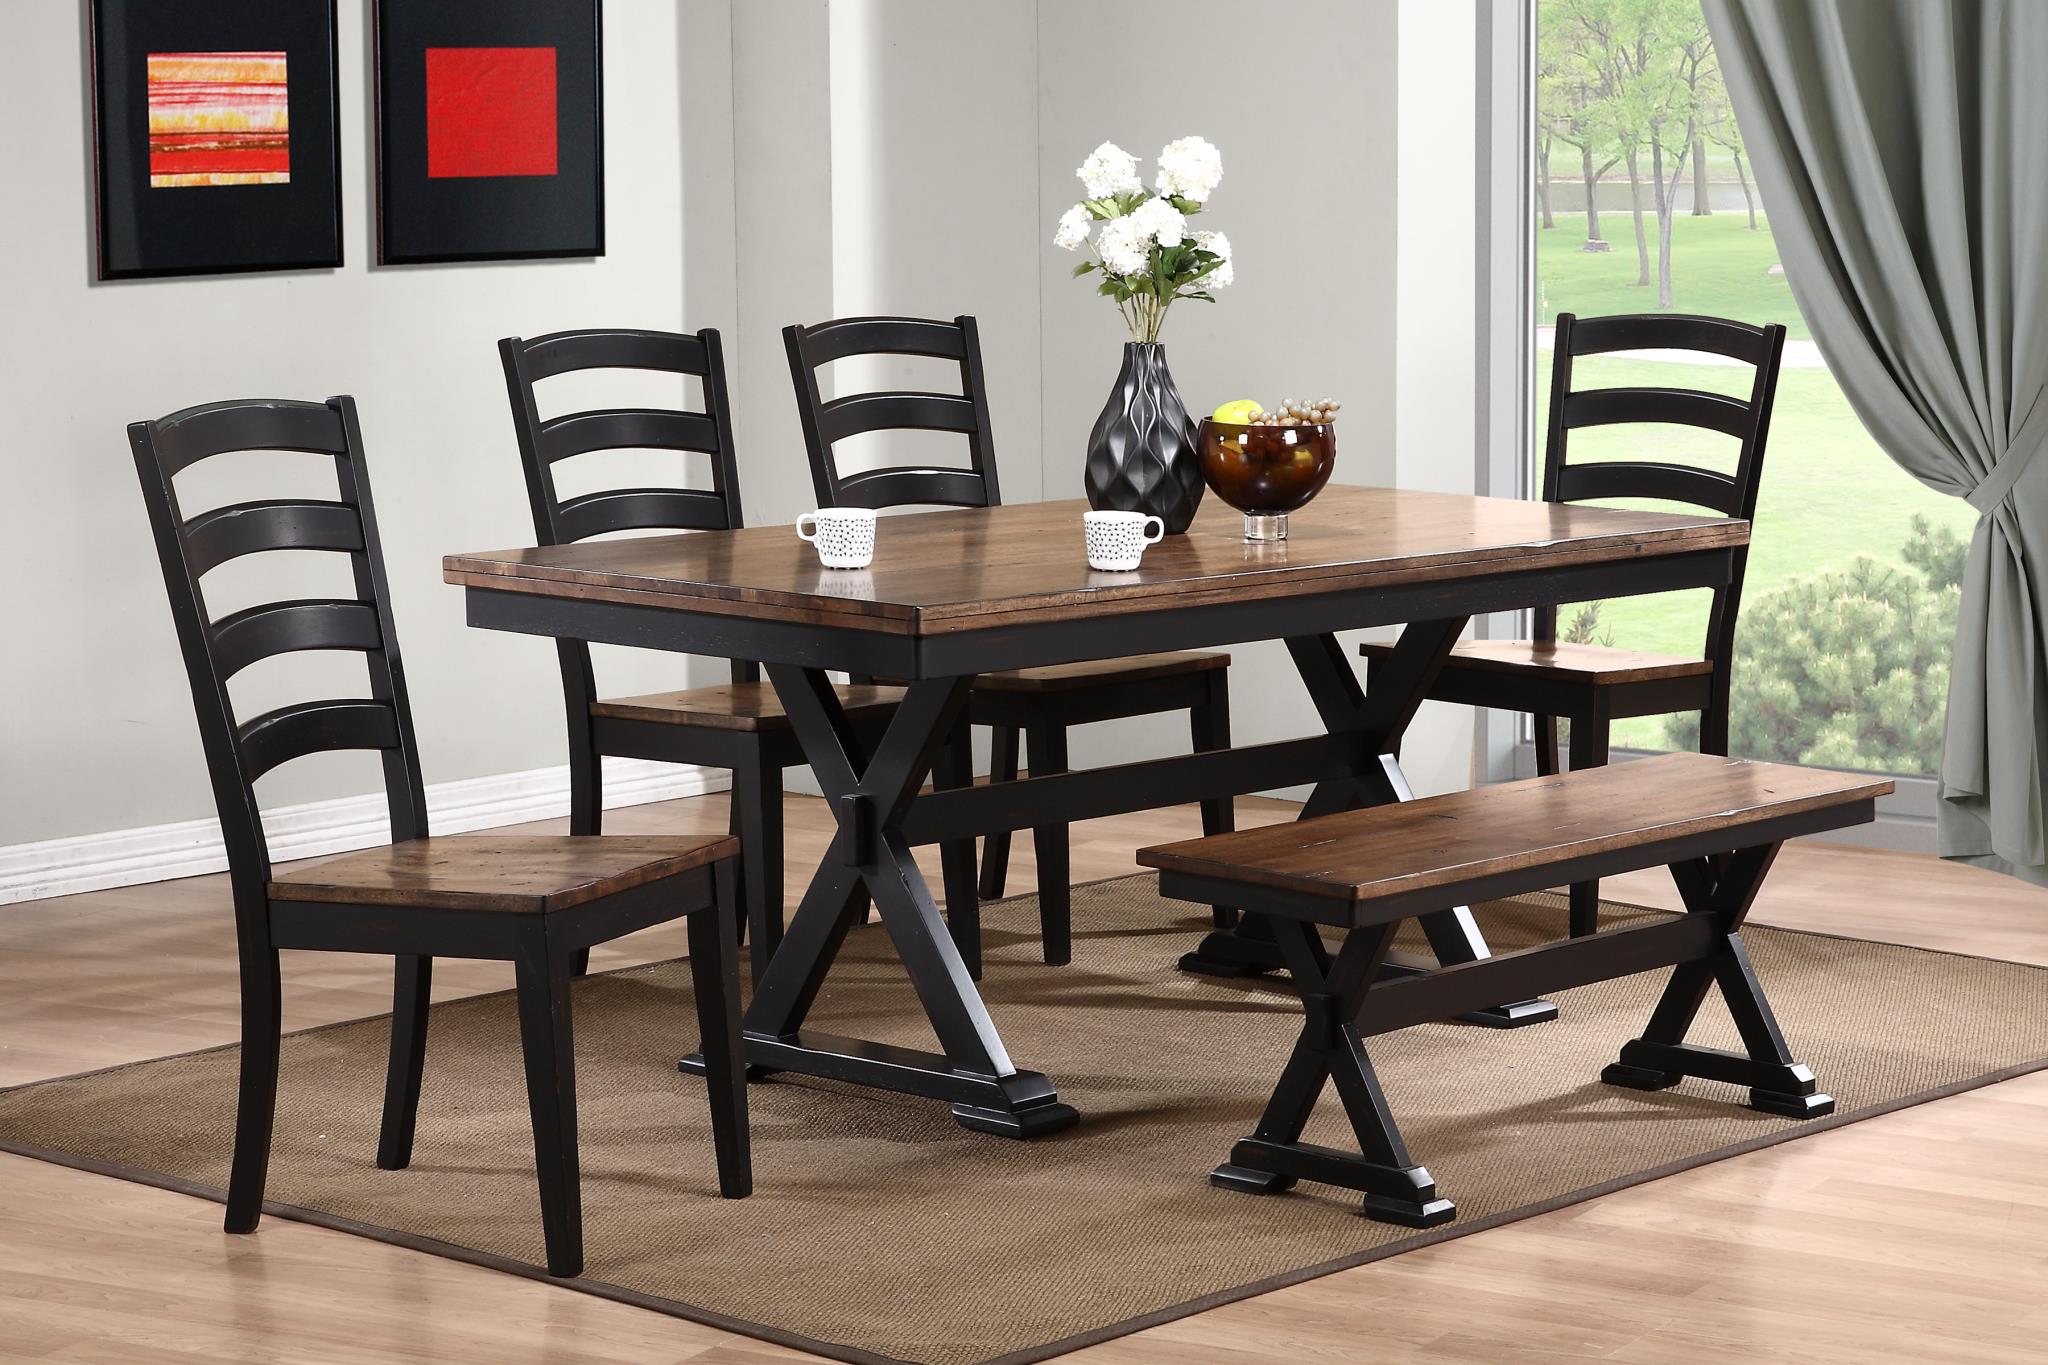 Cambridge 6 Pc Dining Collection by Urban Styles